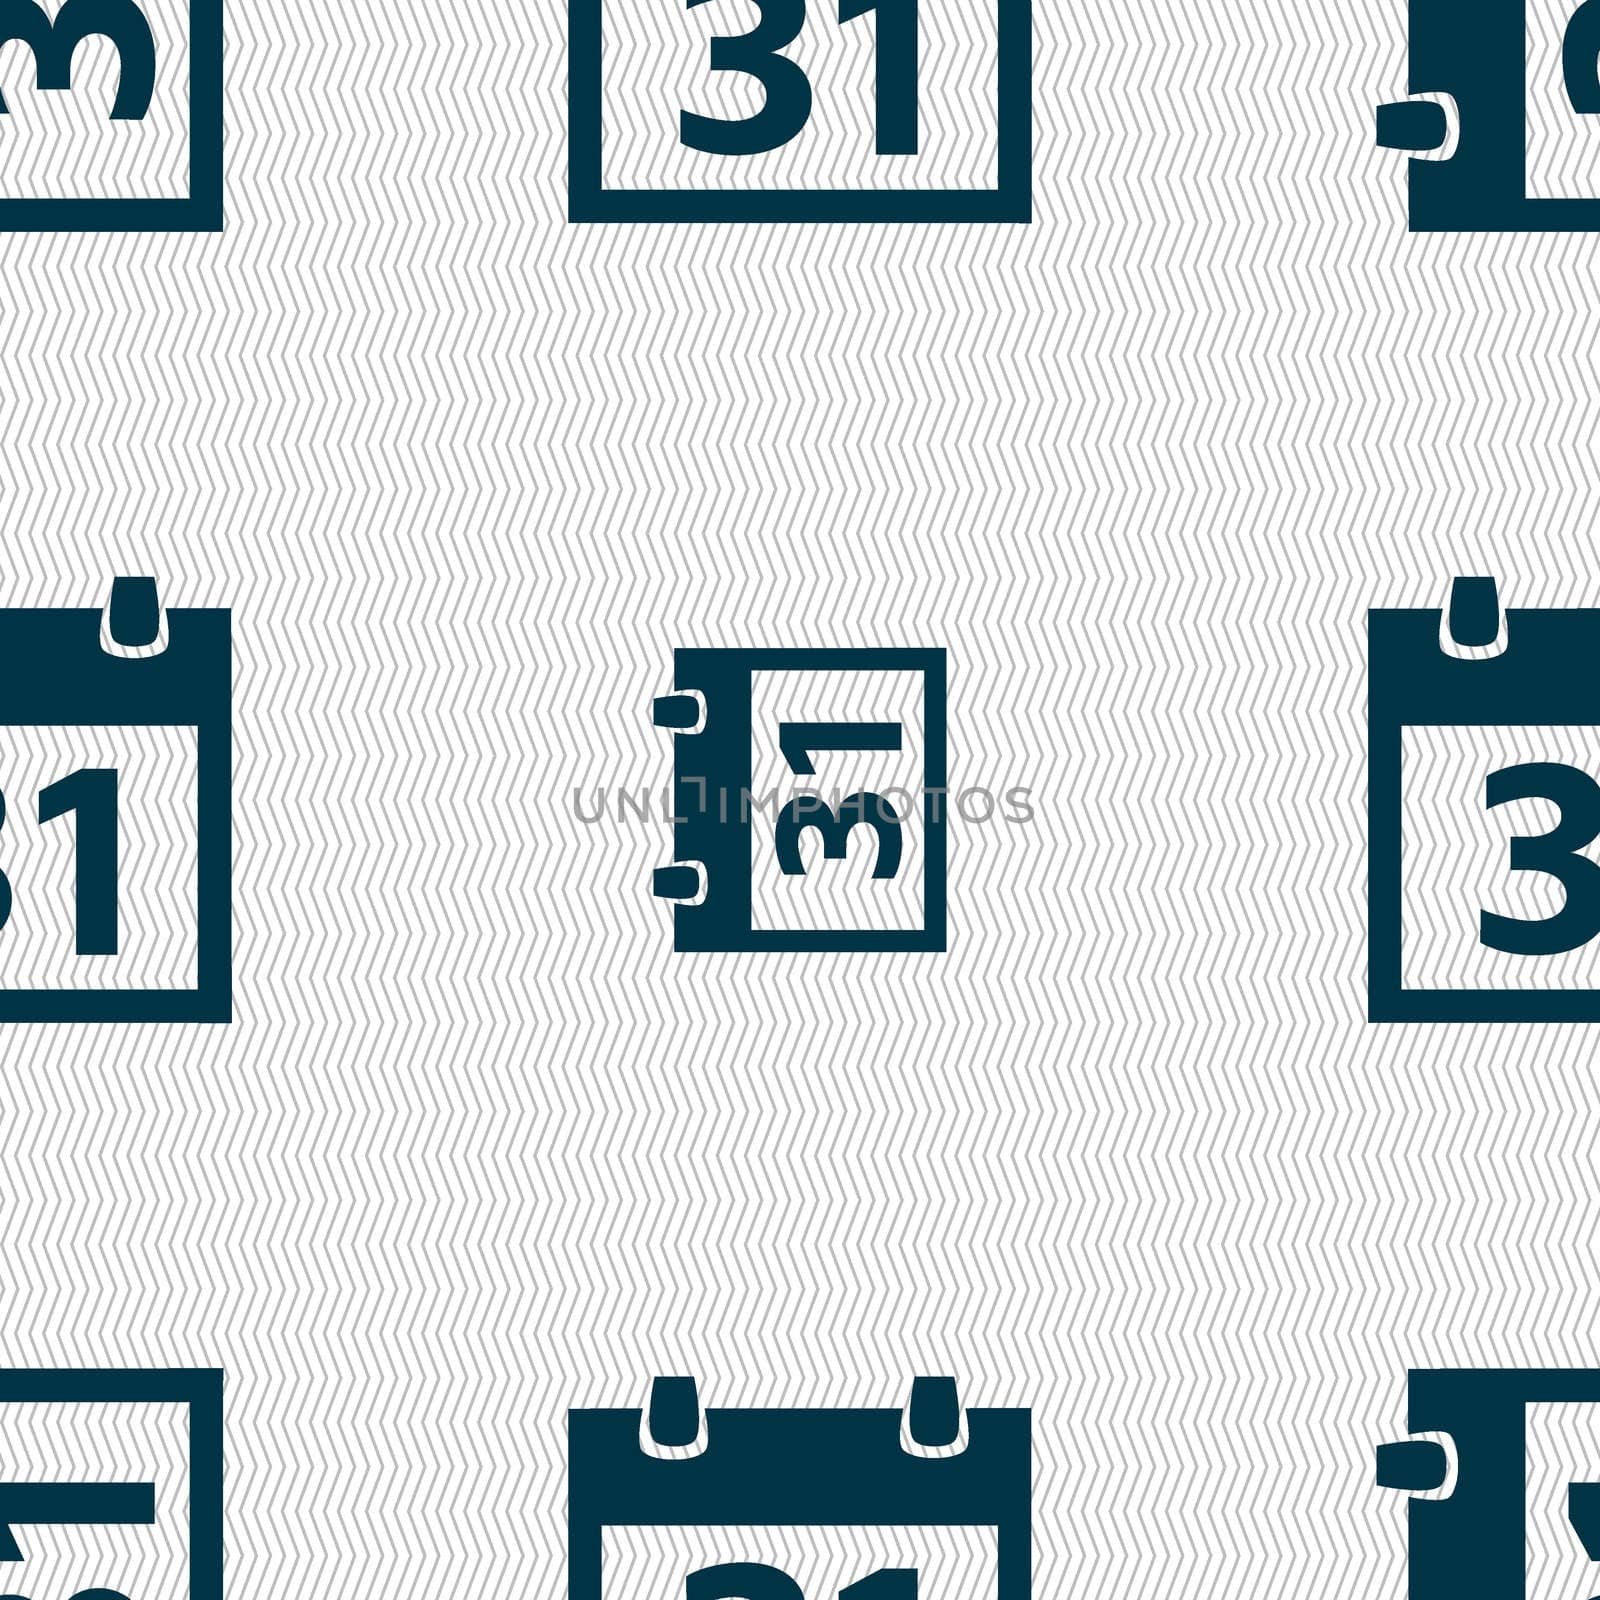 Calendar sign icon. 31 day month symbol. Date button. Seamless abstract background with geometric shapes. illustration